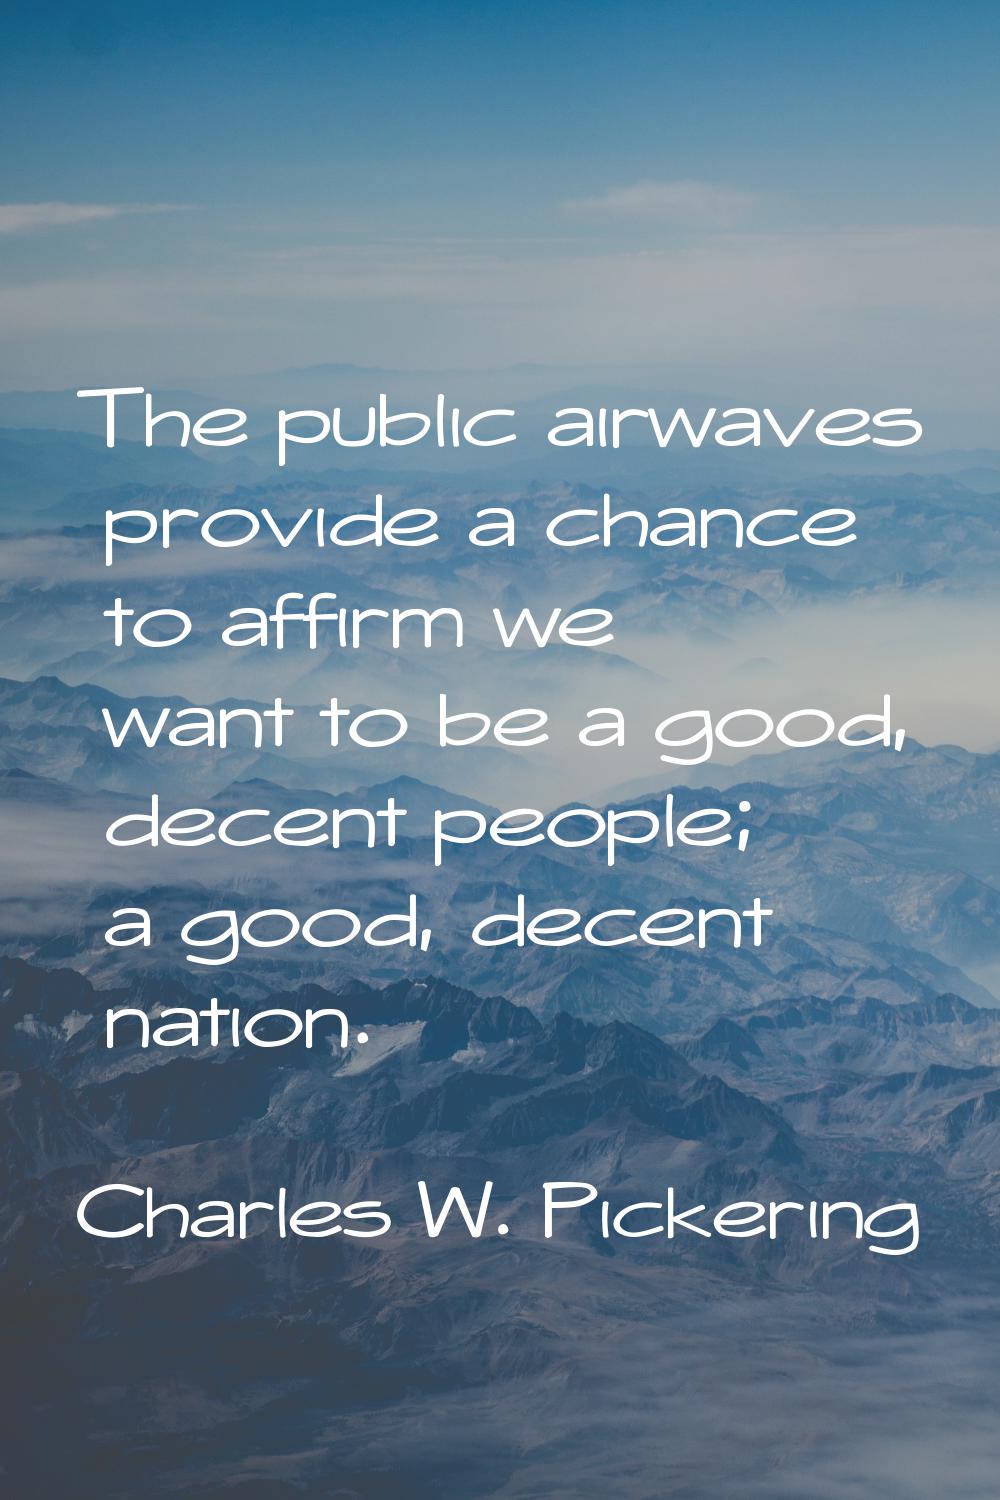 The public airwaves provide a chance to affirm we want to be a good, decent people; a good, decent 